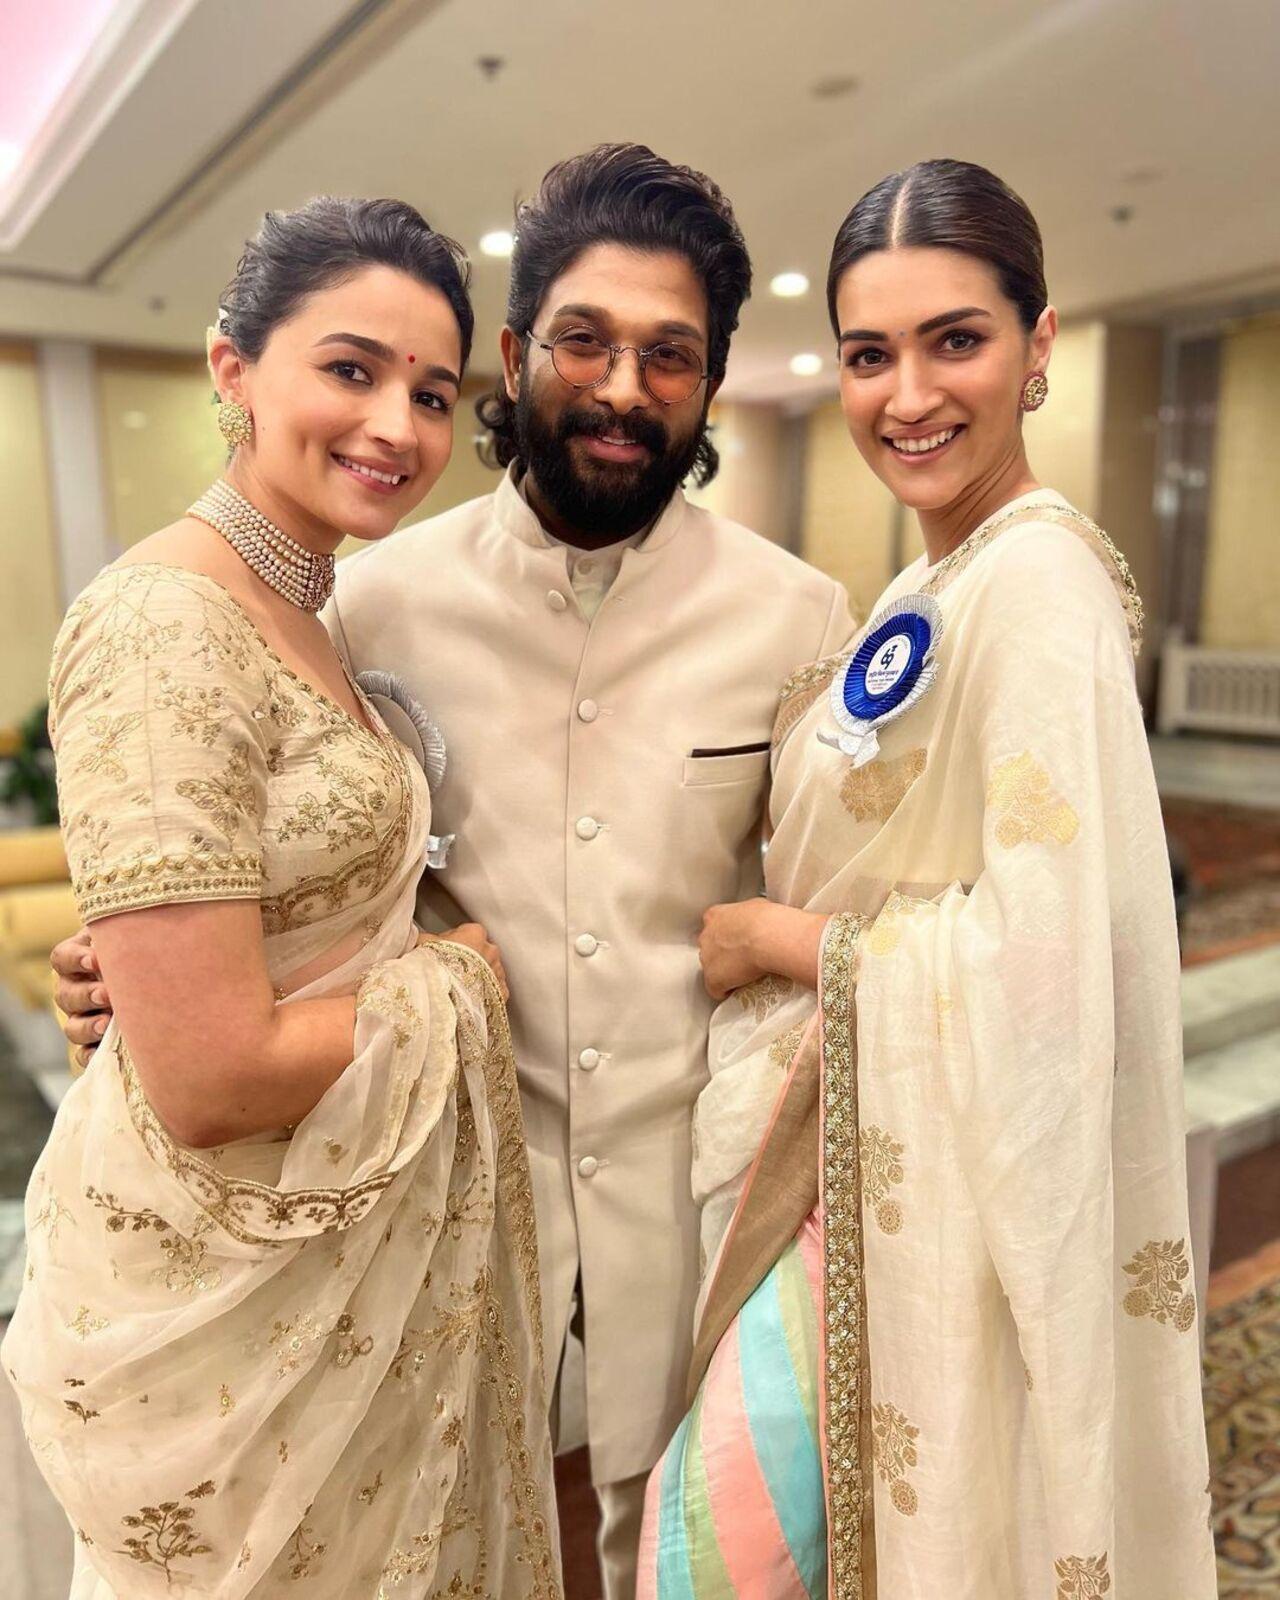 Best Actors- Alia Bhatt, Kriti Sanon and Allu Arjun twinned in shades of ivory at the National Award ceremony in Delhi. They posed for a pretty picture